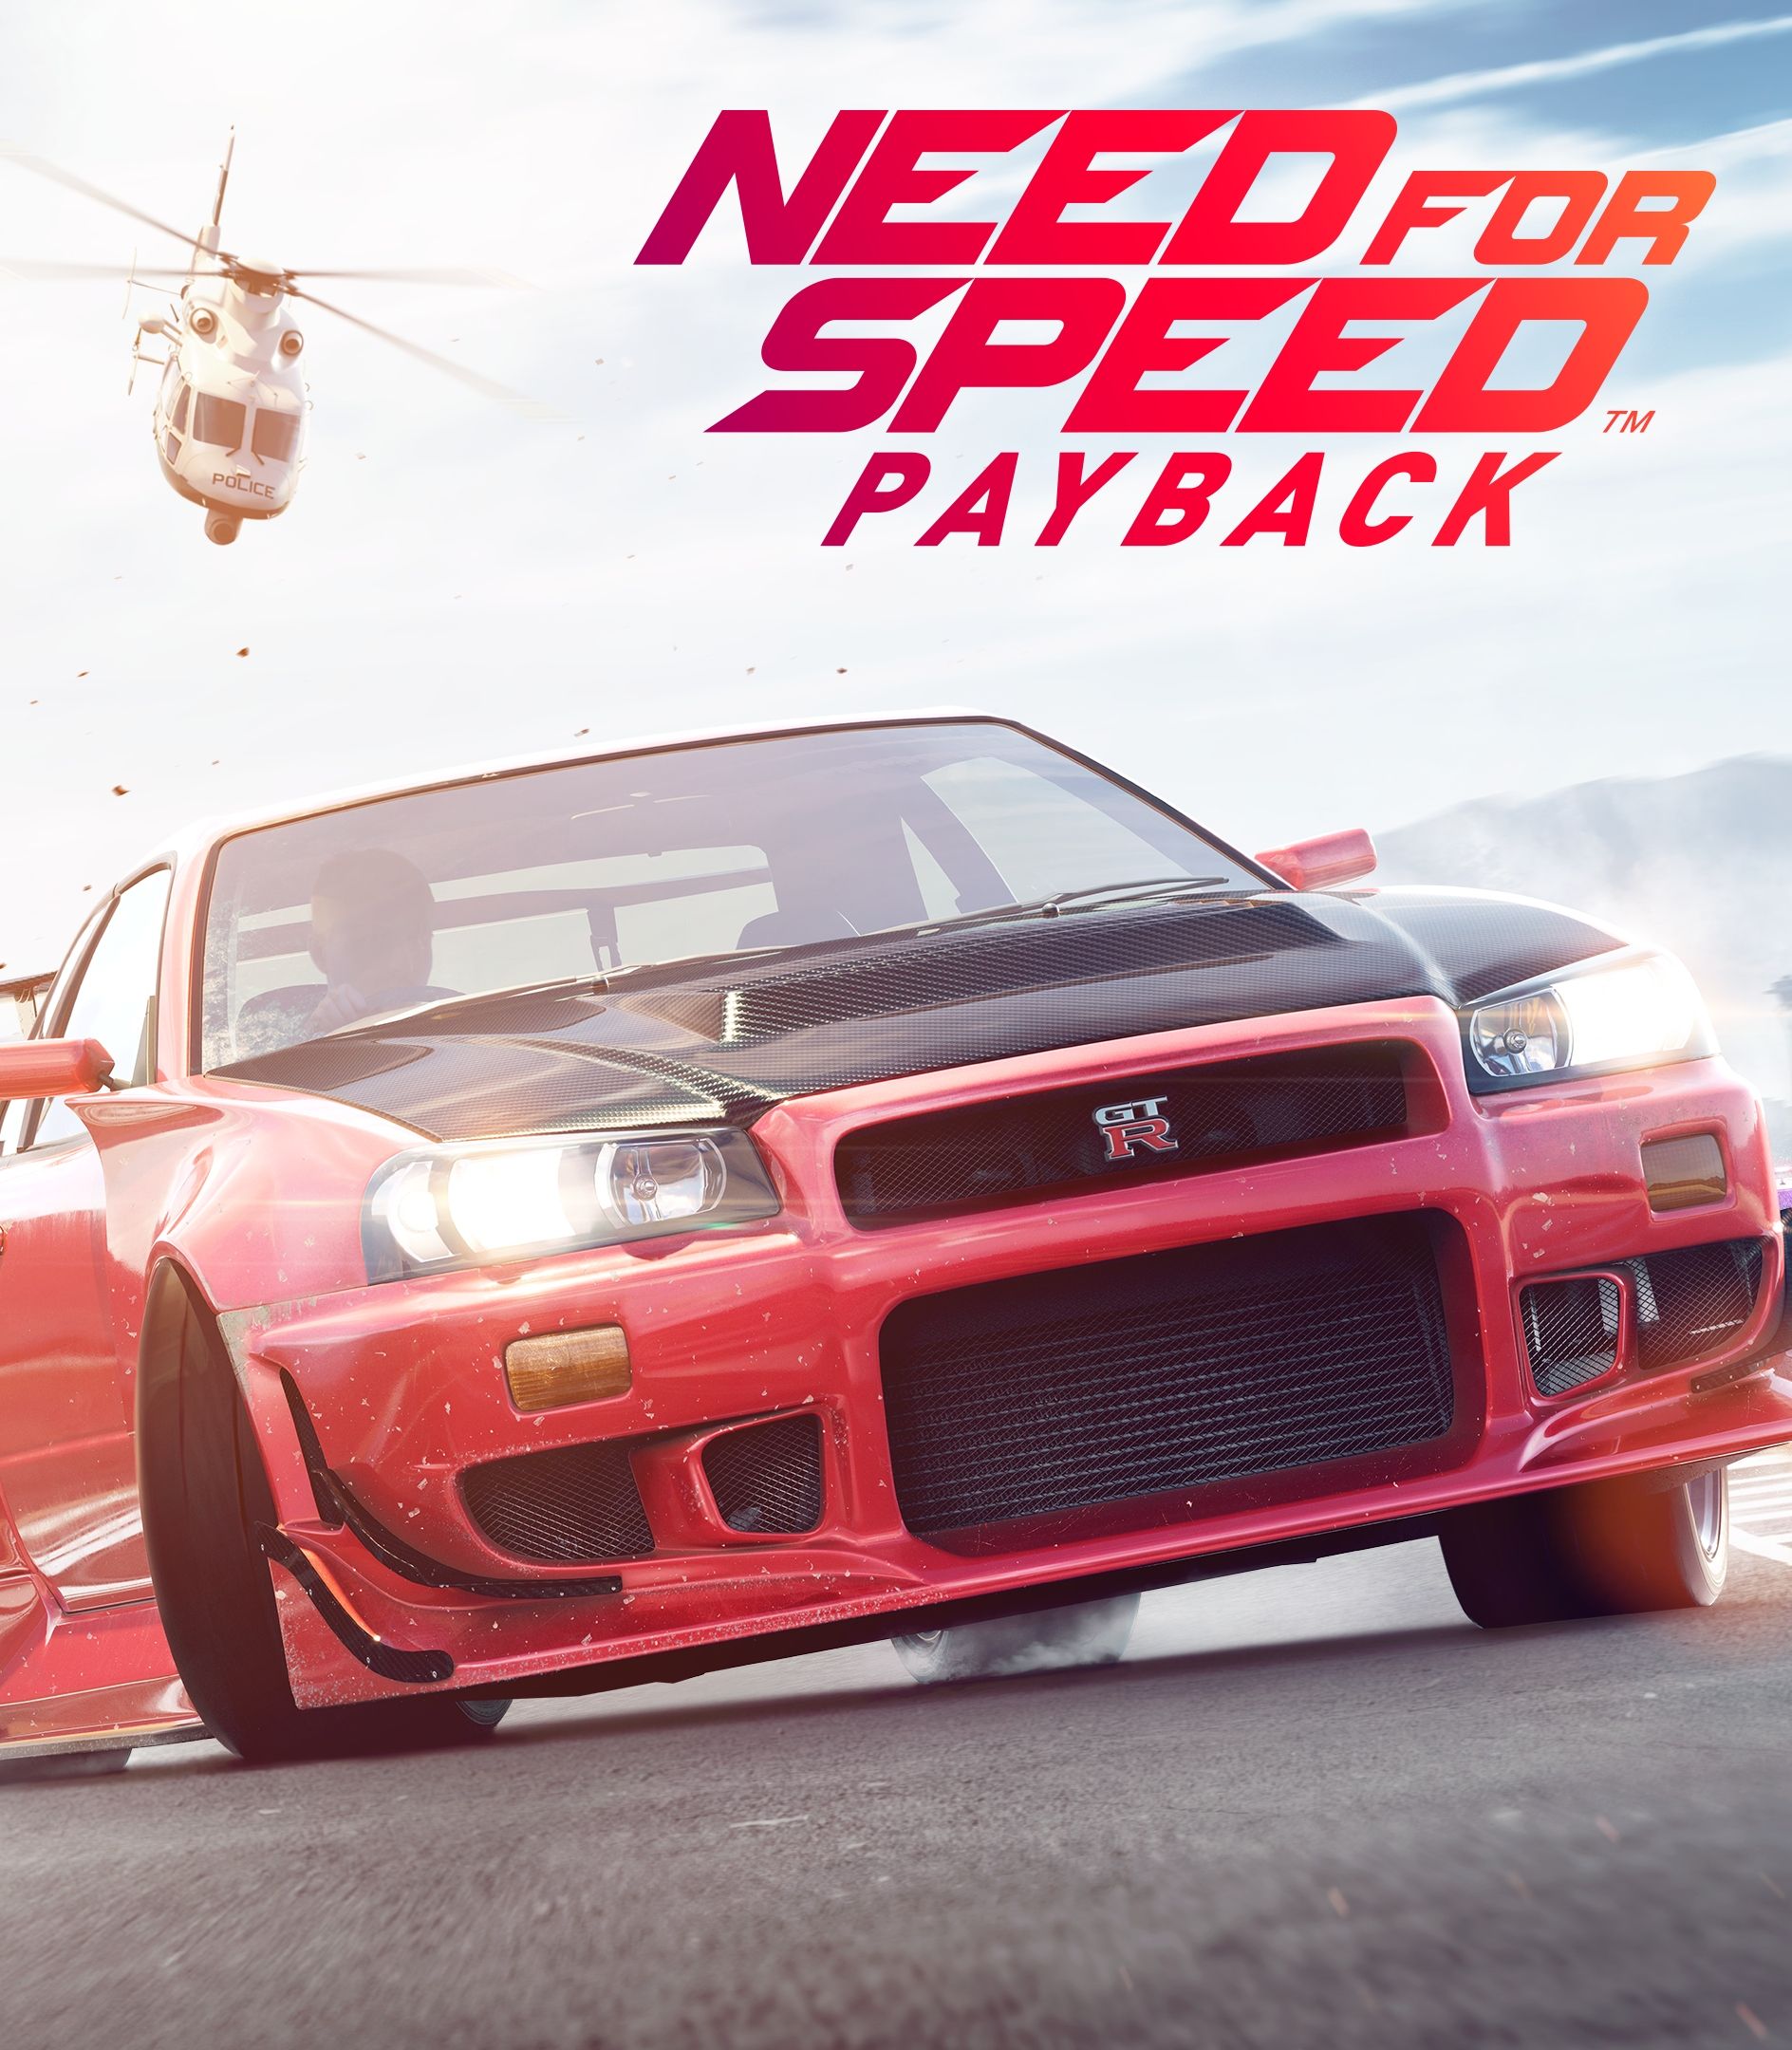 Need for Speed Payback poster vertical